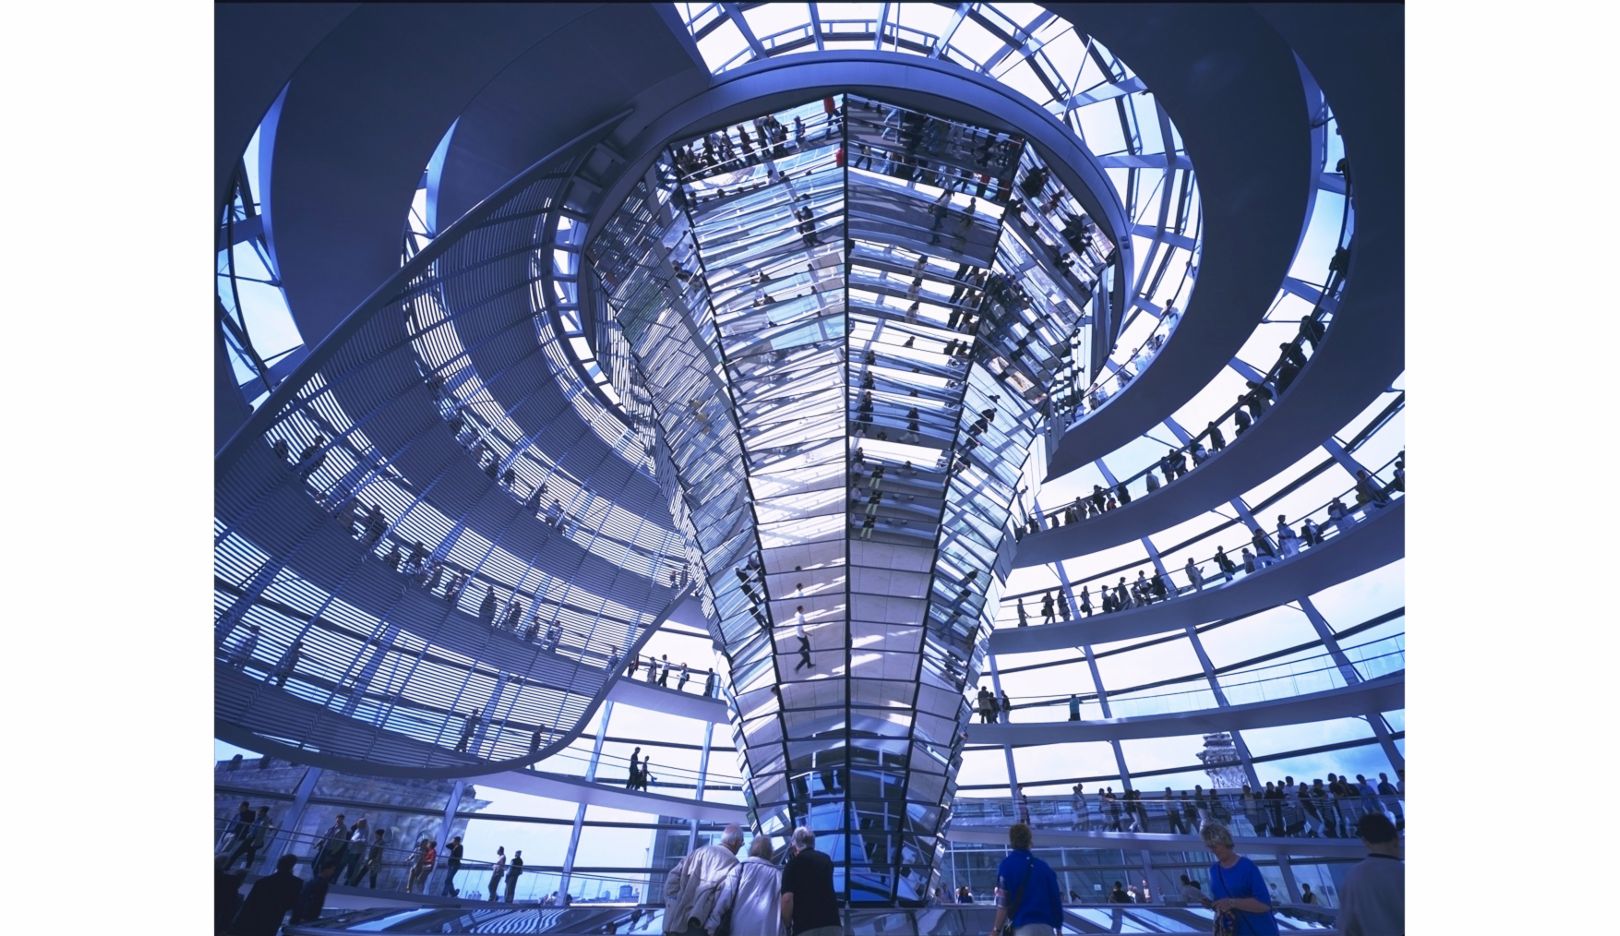 In 1993, Lord Norman Foster won the competition to reconstruct the Reichstag building in Berlin. Visitors can travel up to its glass dome and look down into the assembly hall below. At the centre of the dome, a funnel-shaped ‘light-sculptor’ with 360 mirrors reflects and directs natural light into the area. Photo: Nigel Young / Foster + Partners